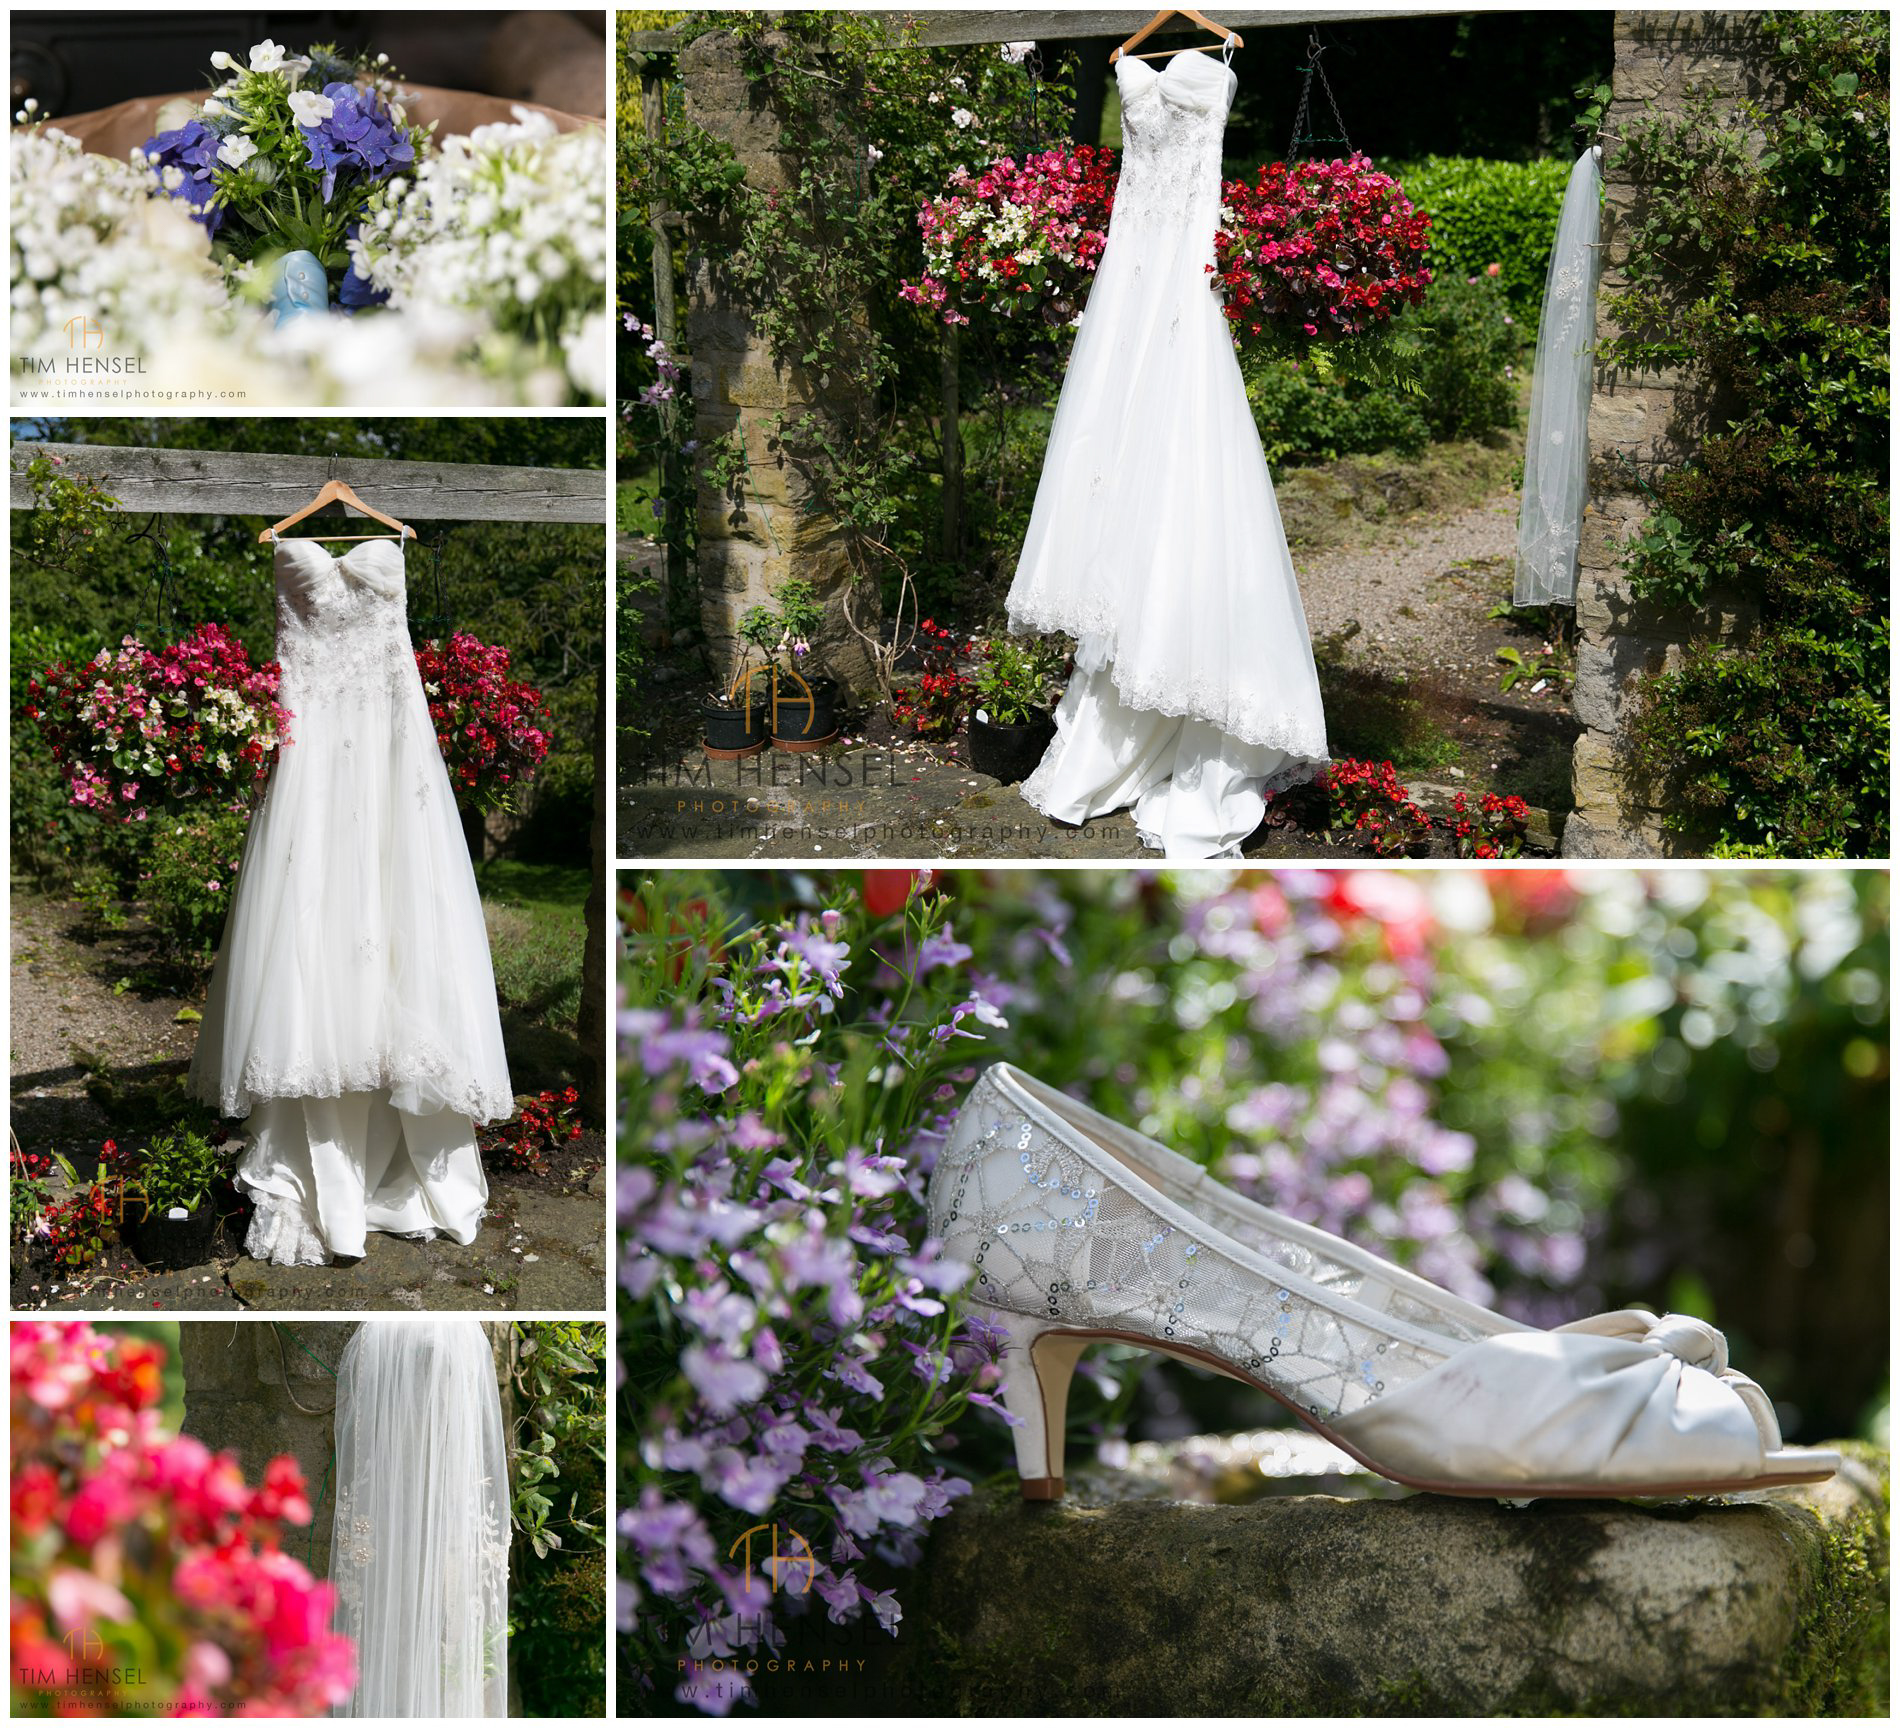 Photos of wedding dress and details in Derbyshire